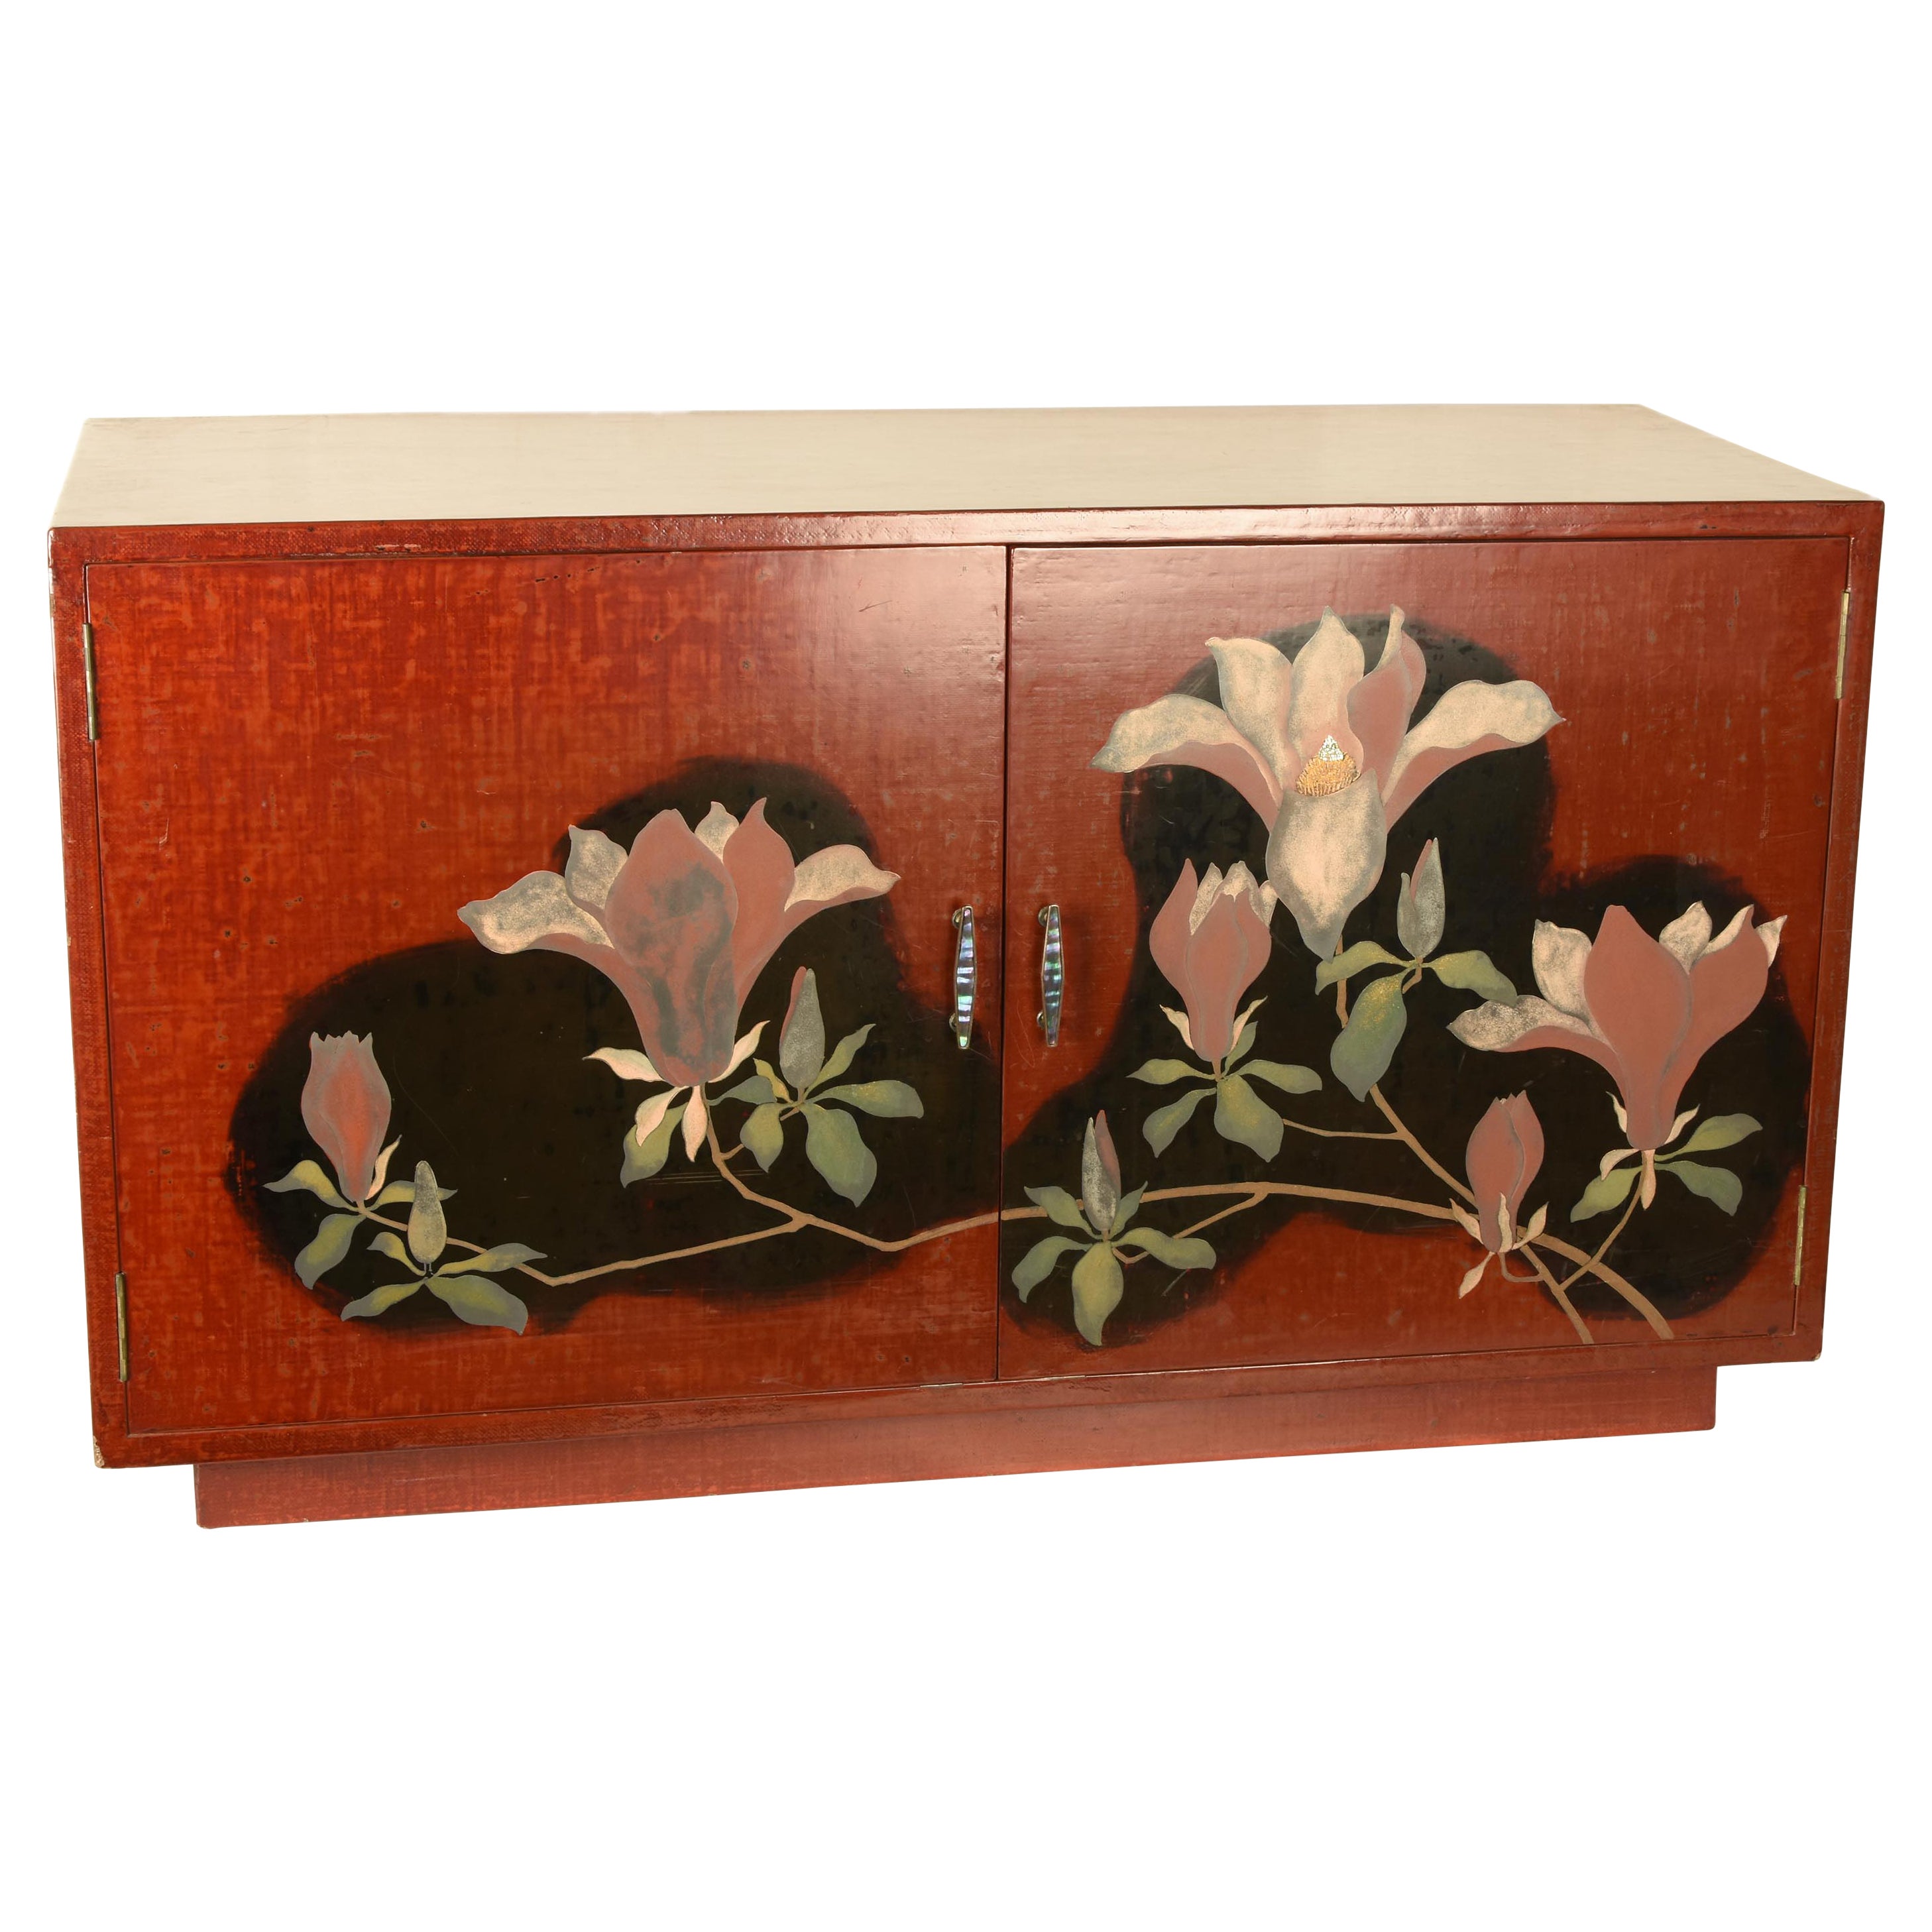 Vintage Japanese Red Lacquer Cabinet with Magnolia Design, Showa Period